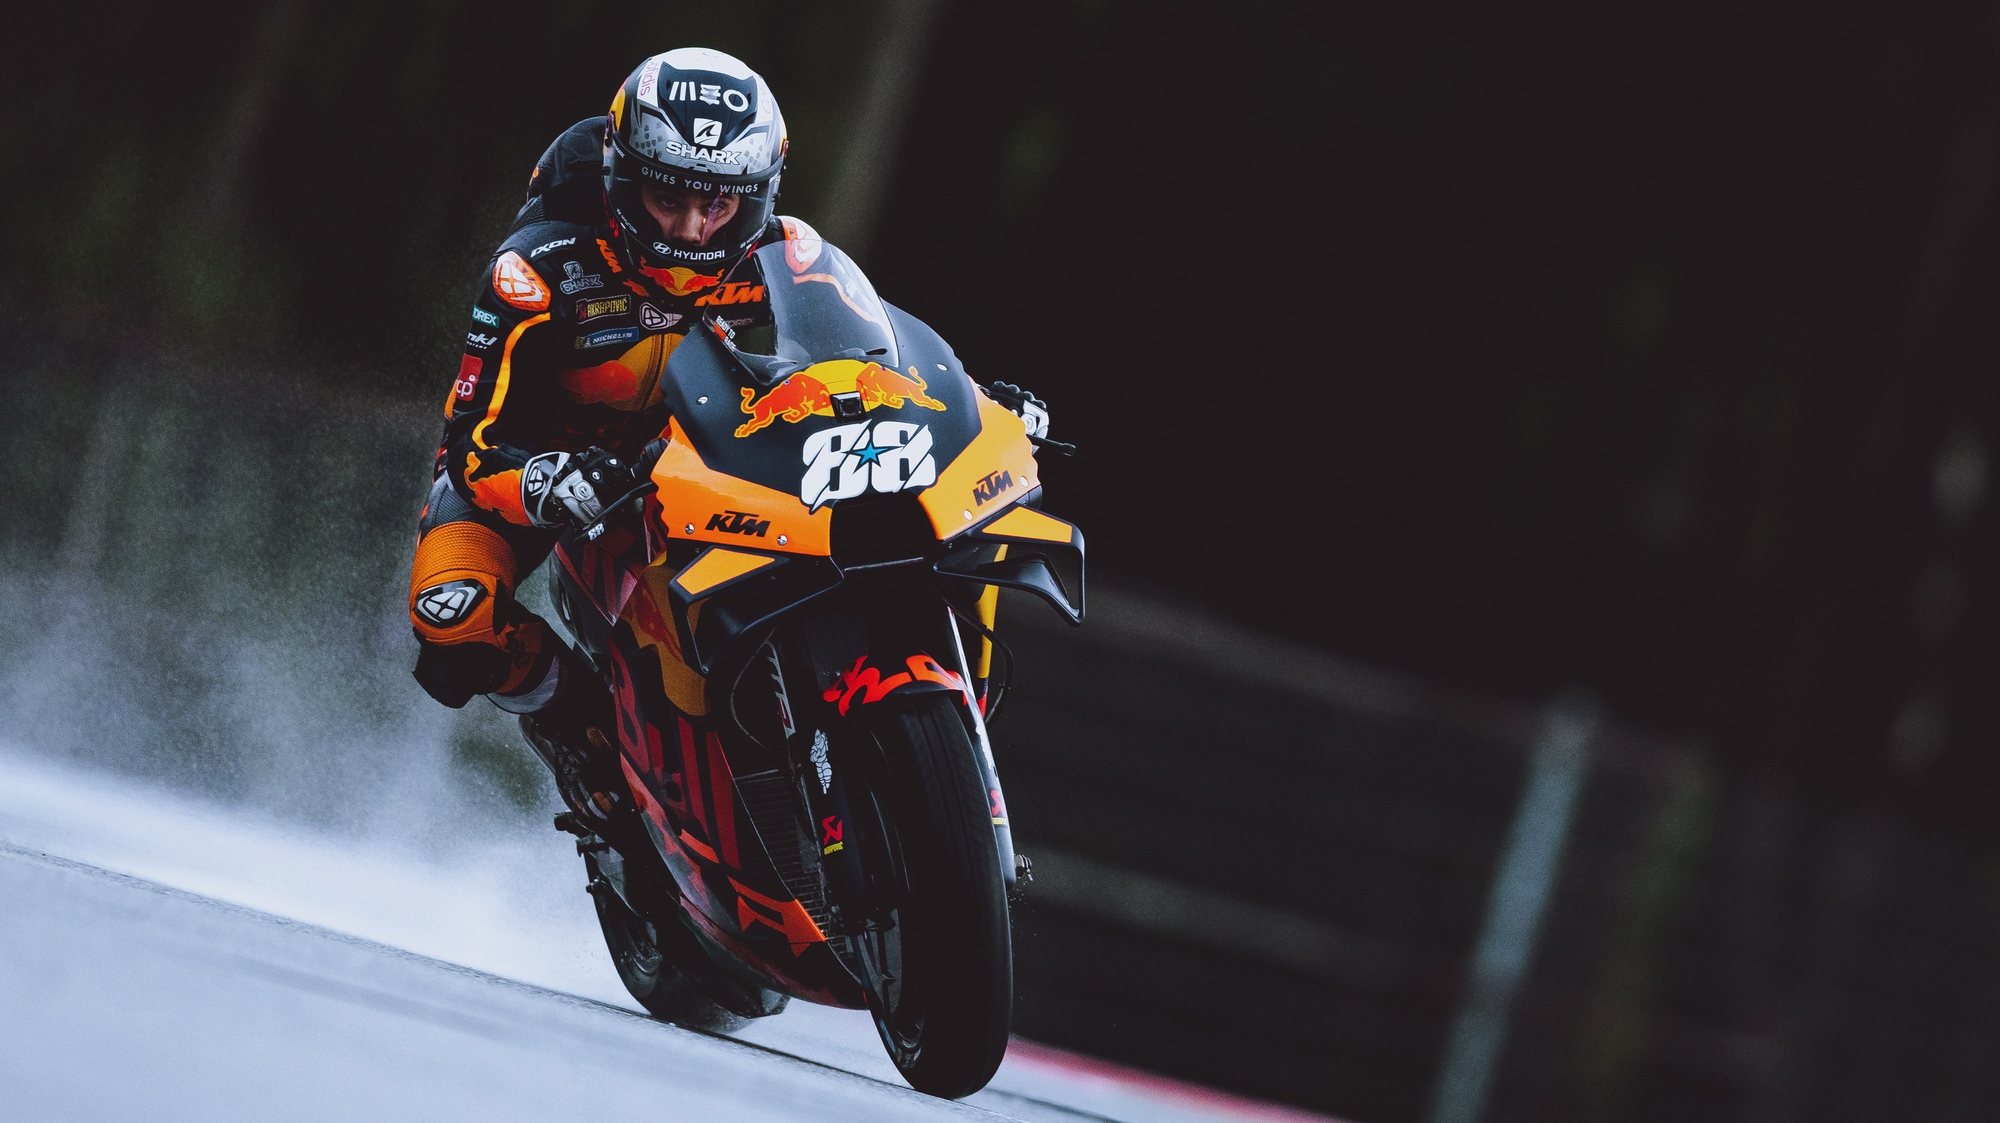 epa09405748 Portuguese MotoGP rider Miguel Oliveira of Red Bull KTM Factory Racing KTM during the warm up for the Grand Prix of Styria at the Red Bull Ring in Spielberg, Austria, 08 August 2021.  EPA/EXPA